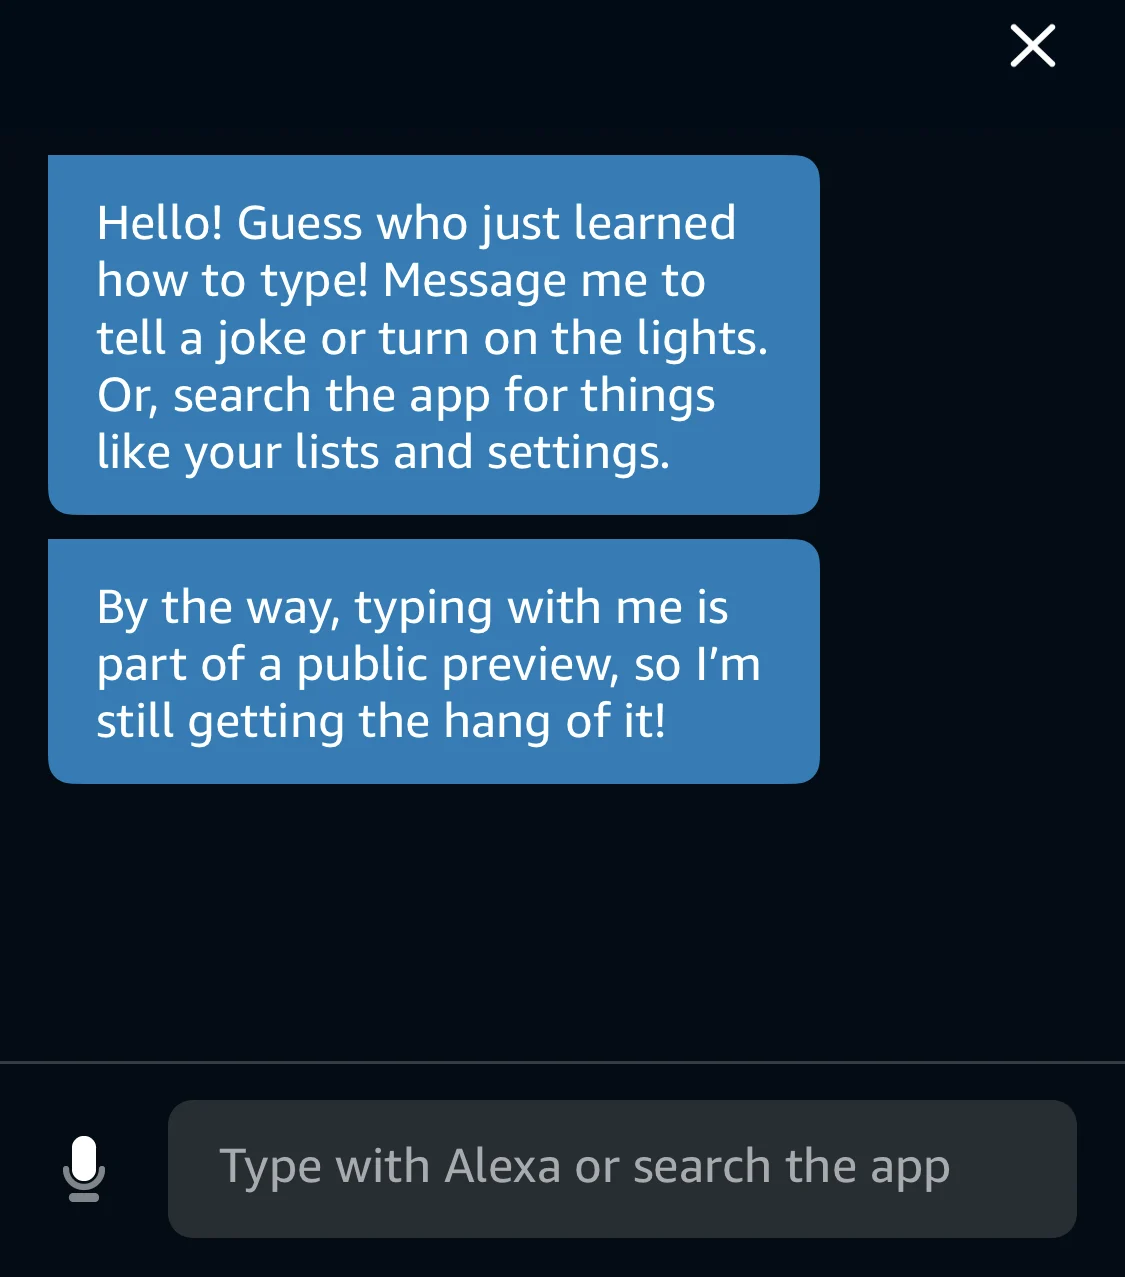 There's a new way to chat with Alexa.